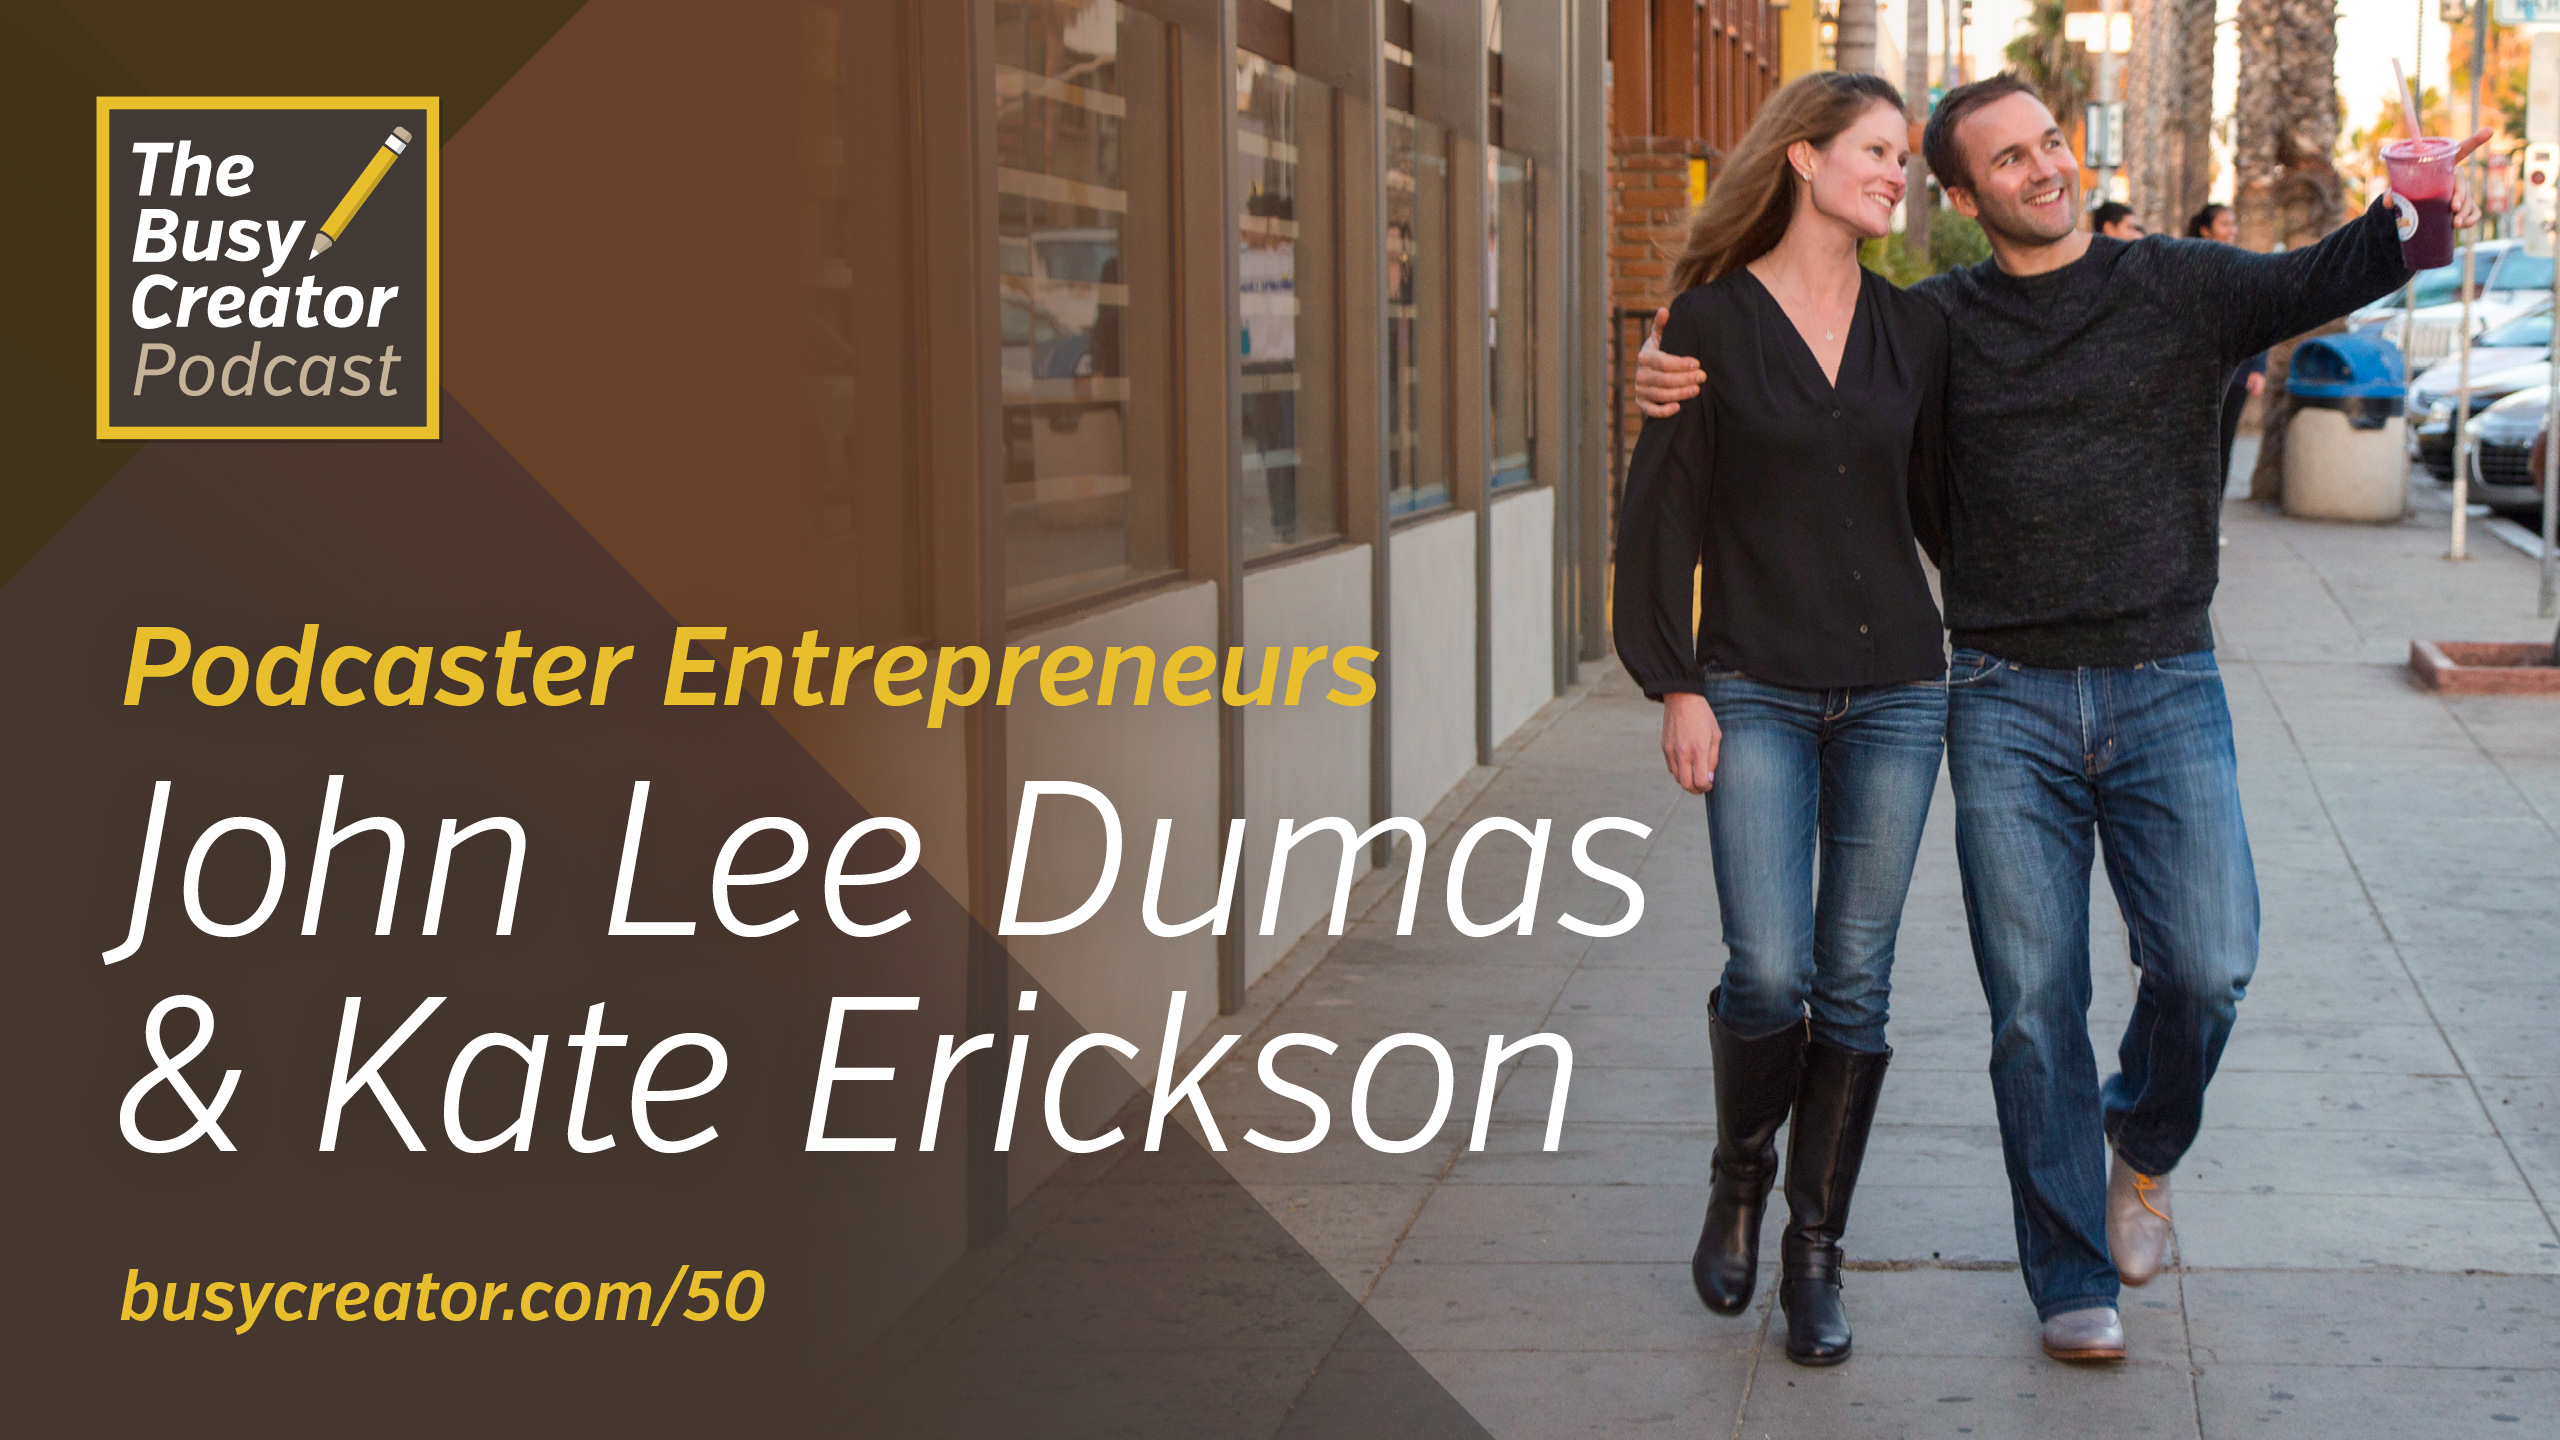 Creating Workflows and Habits for Work-from-Home Success with Podcaster Entrepreneurs John Lee Dumas & Kate Erickson